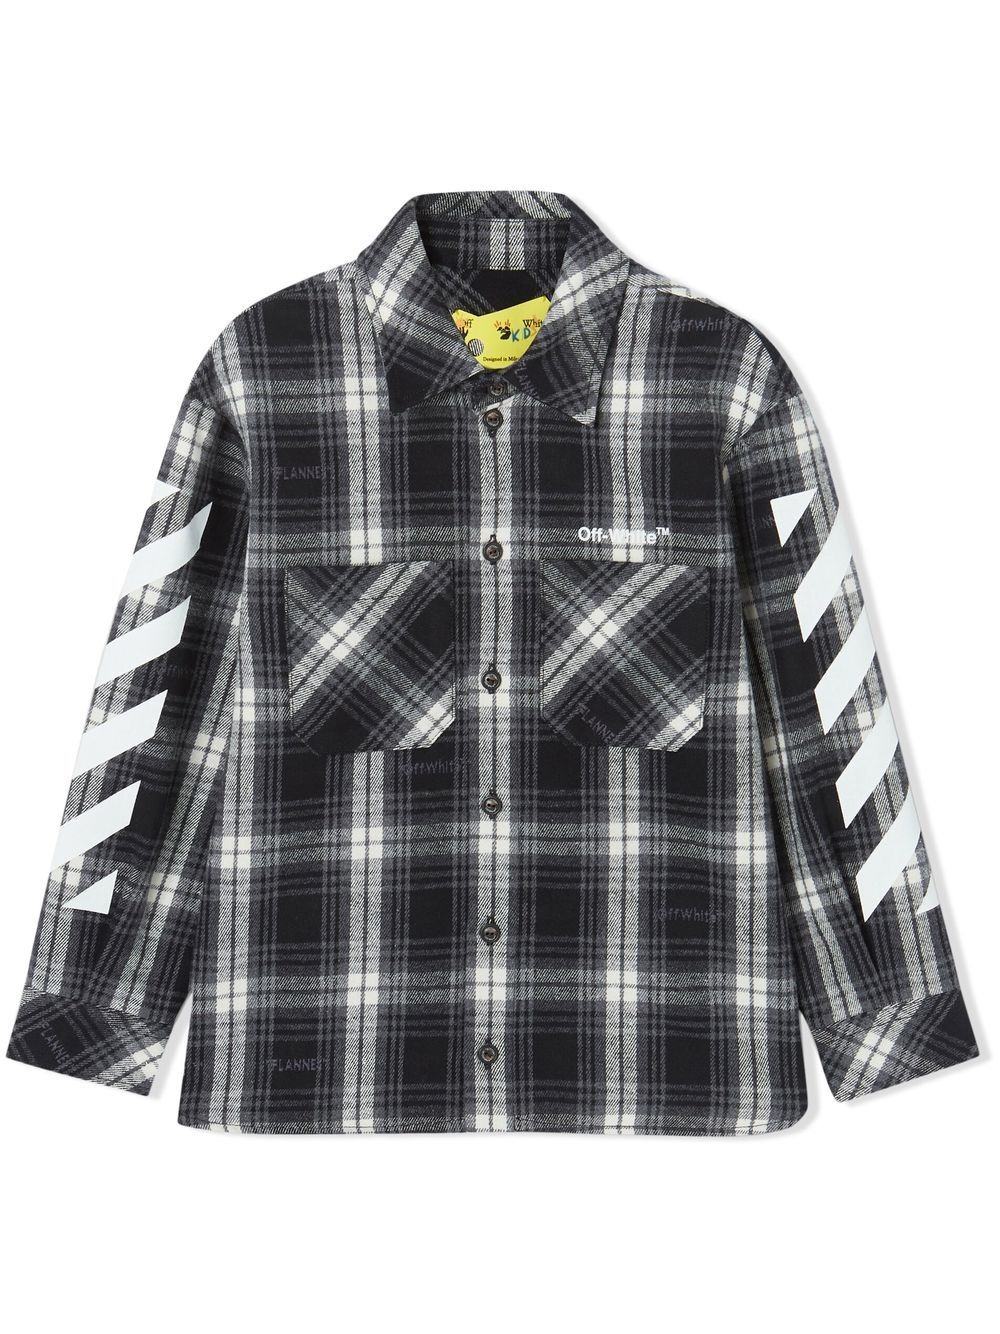 Black Checked Shirt With Helvetica Diagonal Stripes